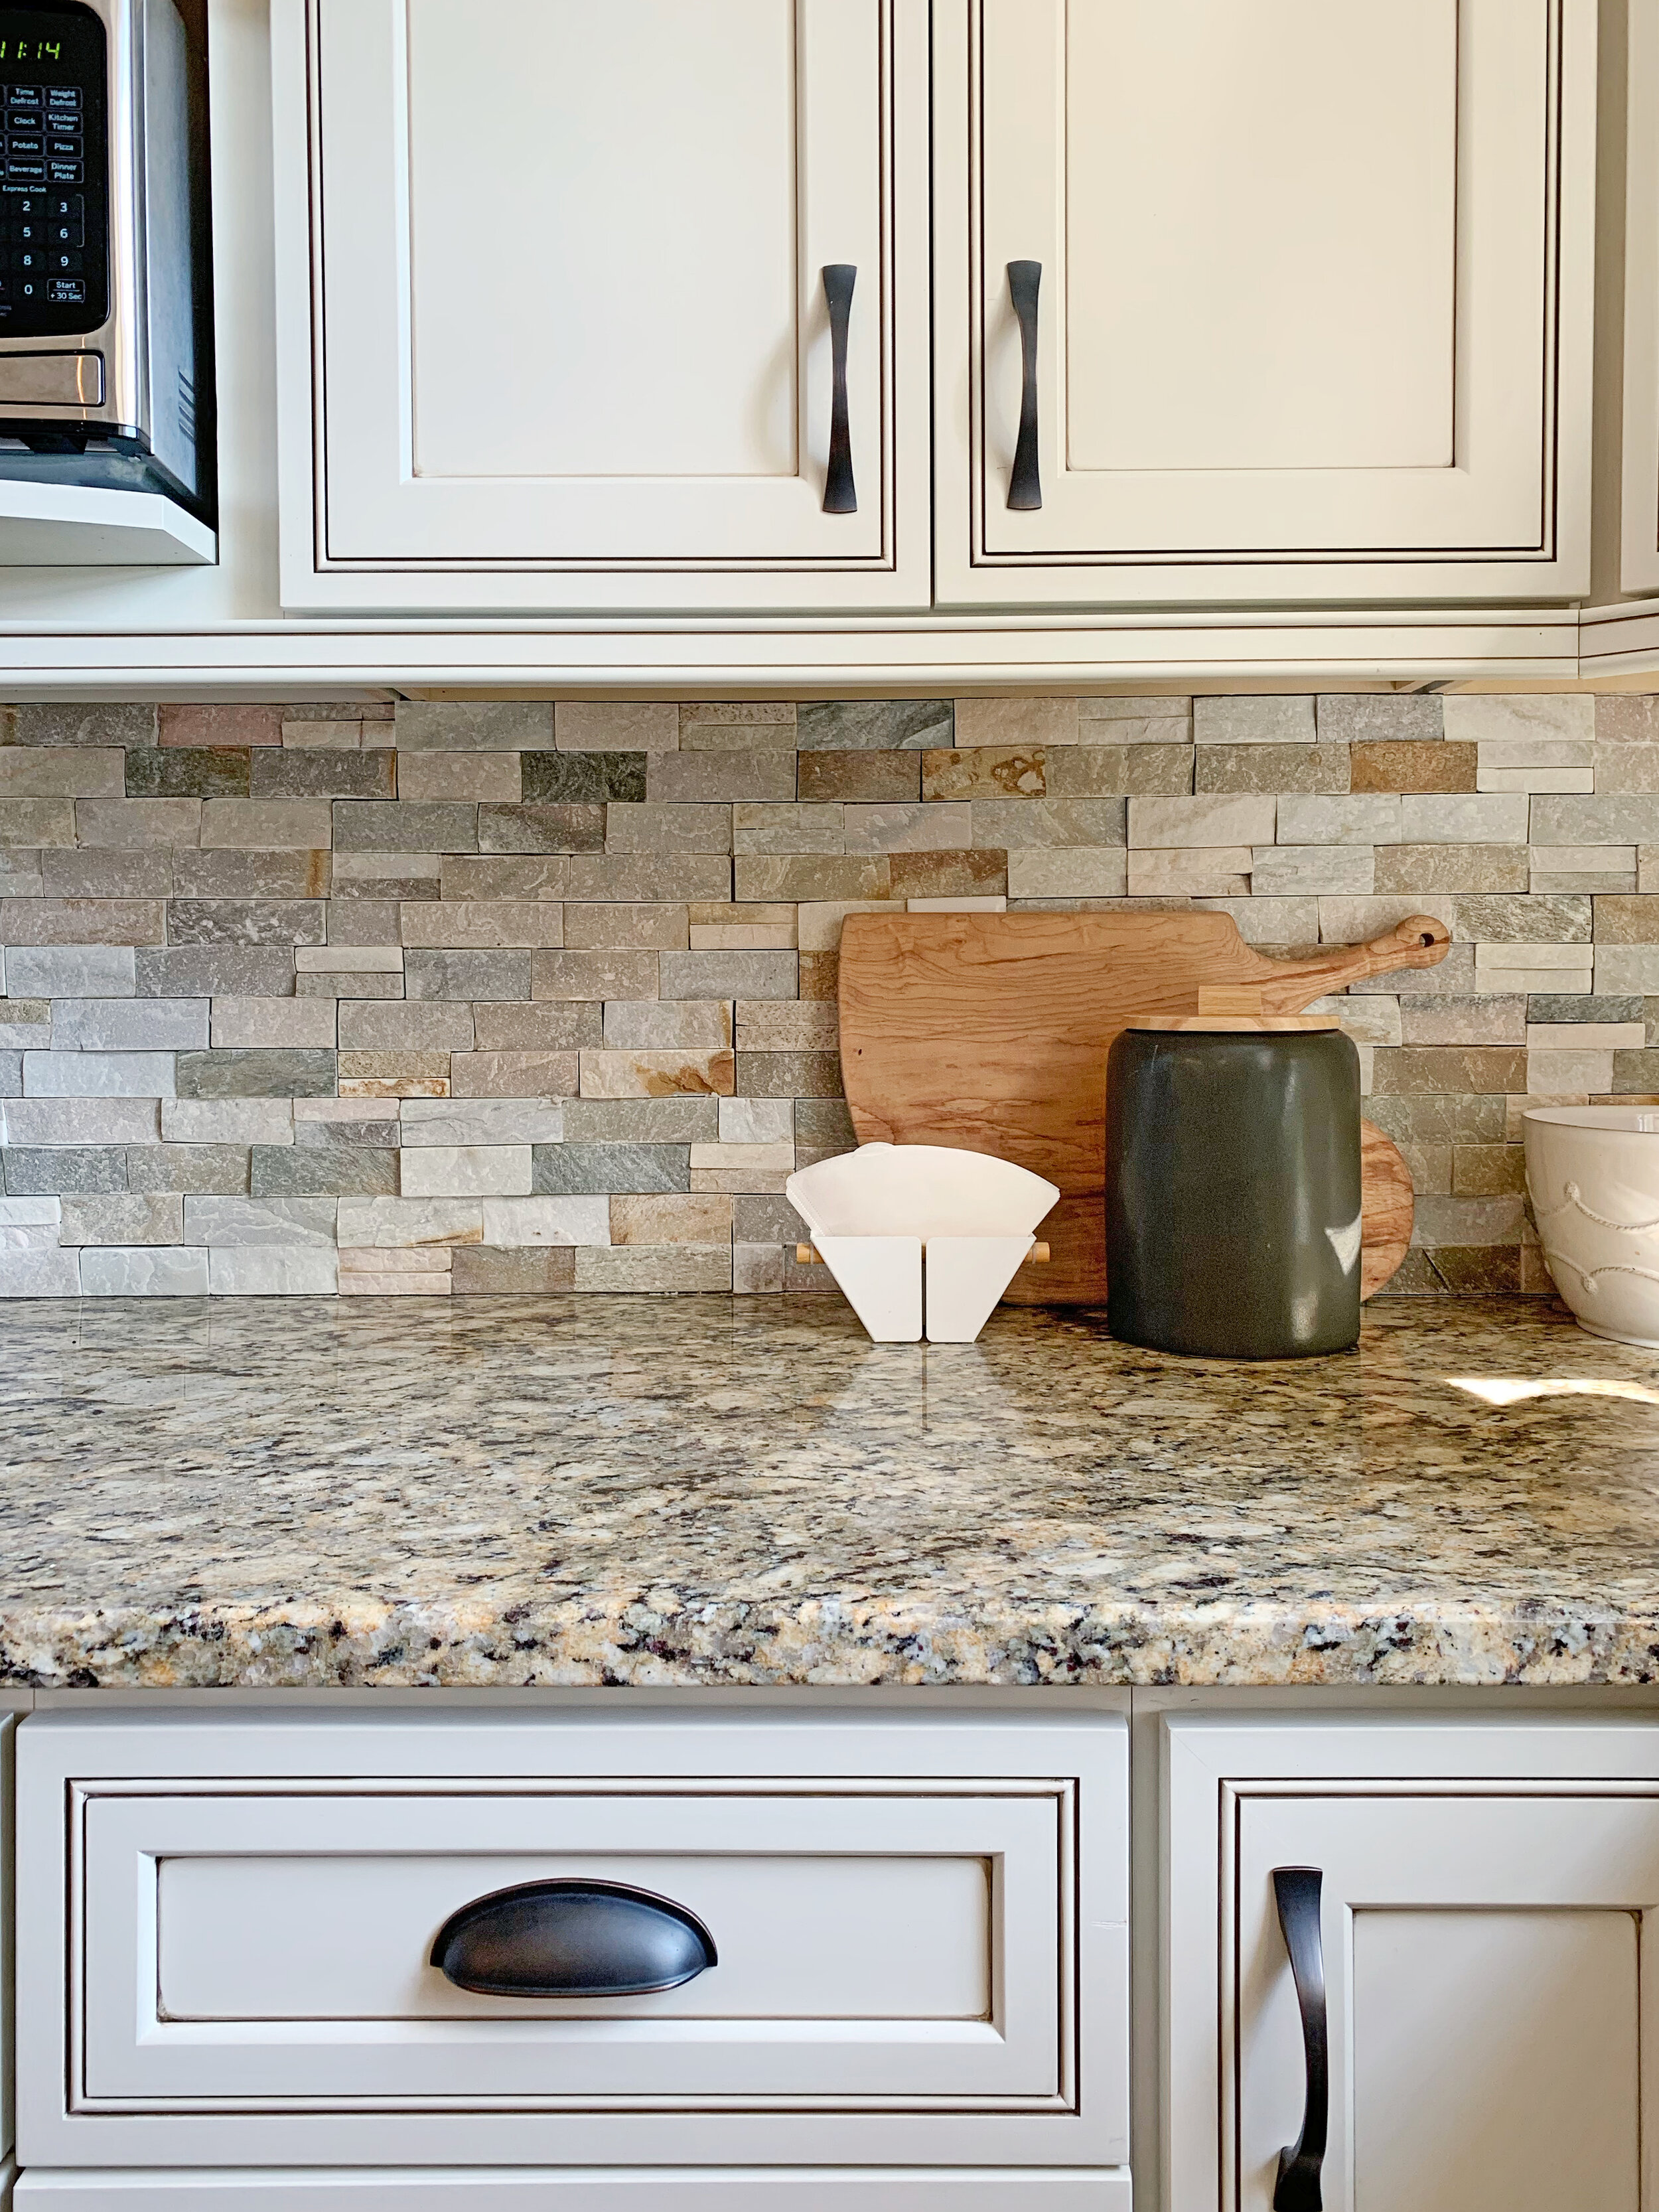 Dated Granite In Your Kitchen, Backsplash To Match Off White Cabinets